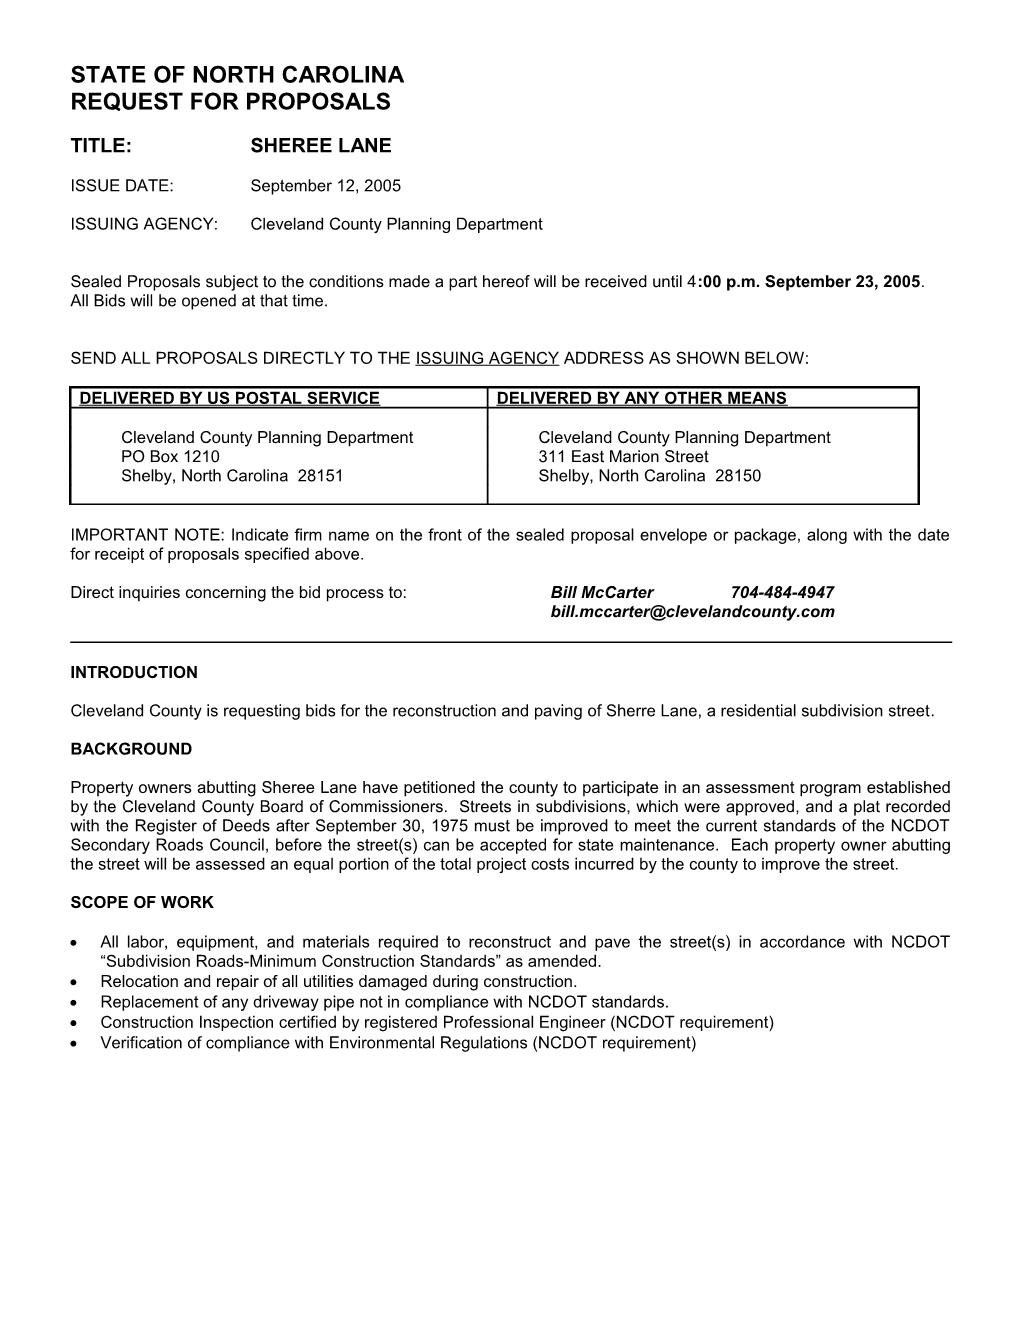 Agency RFP for Services - 9/4/2002